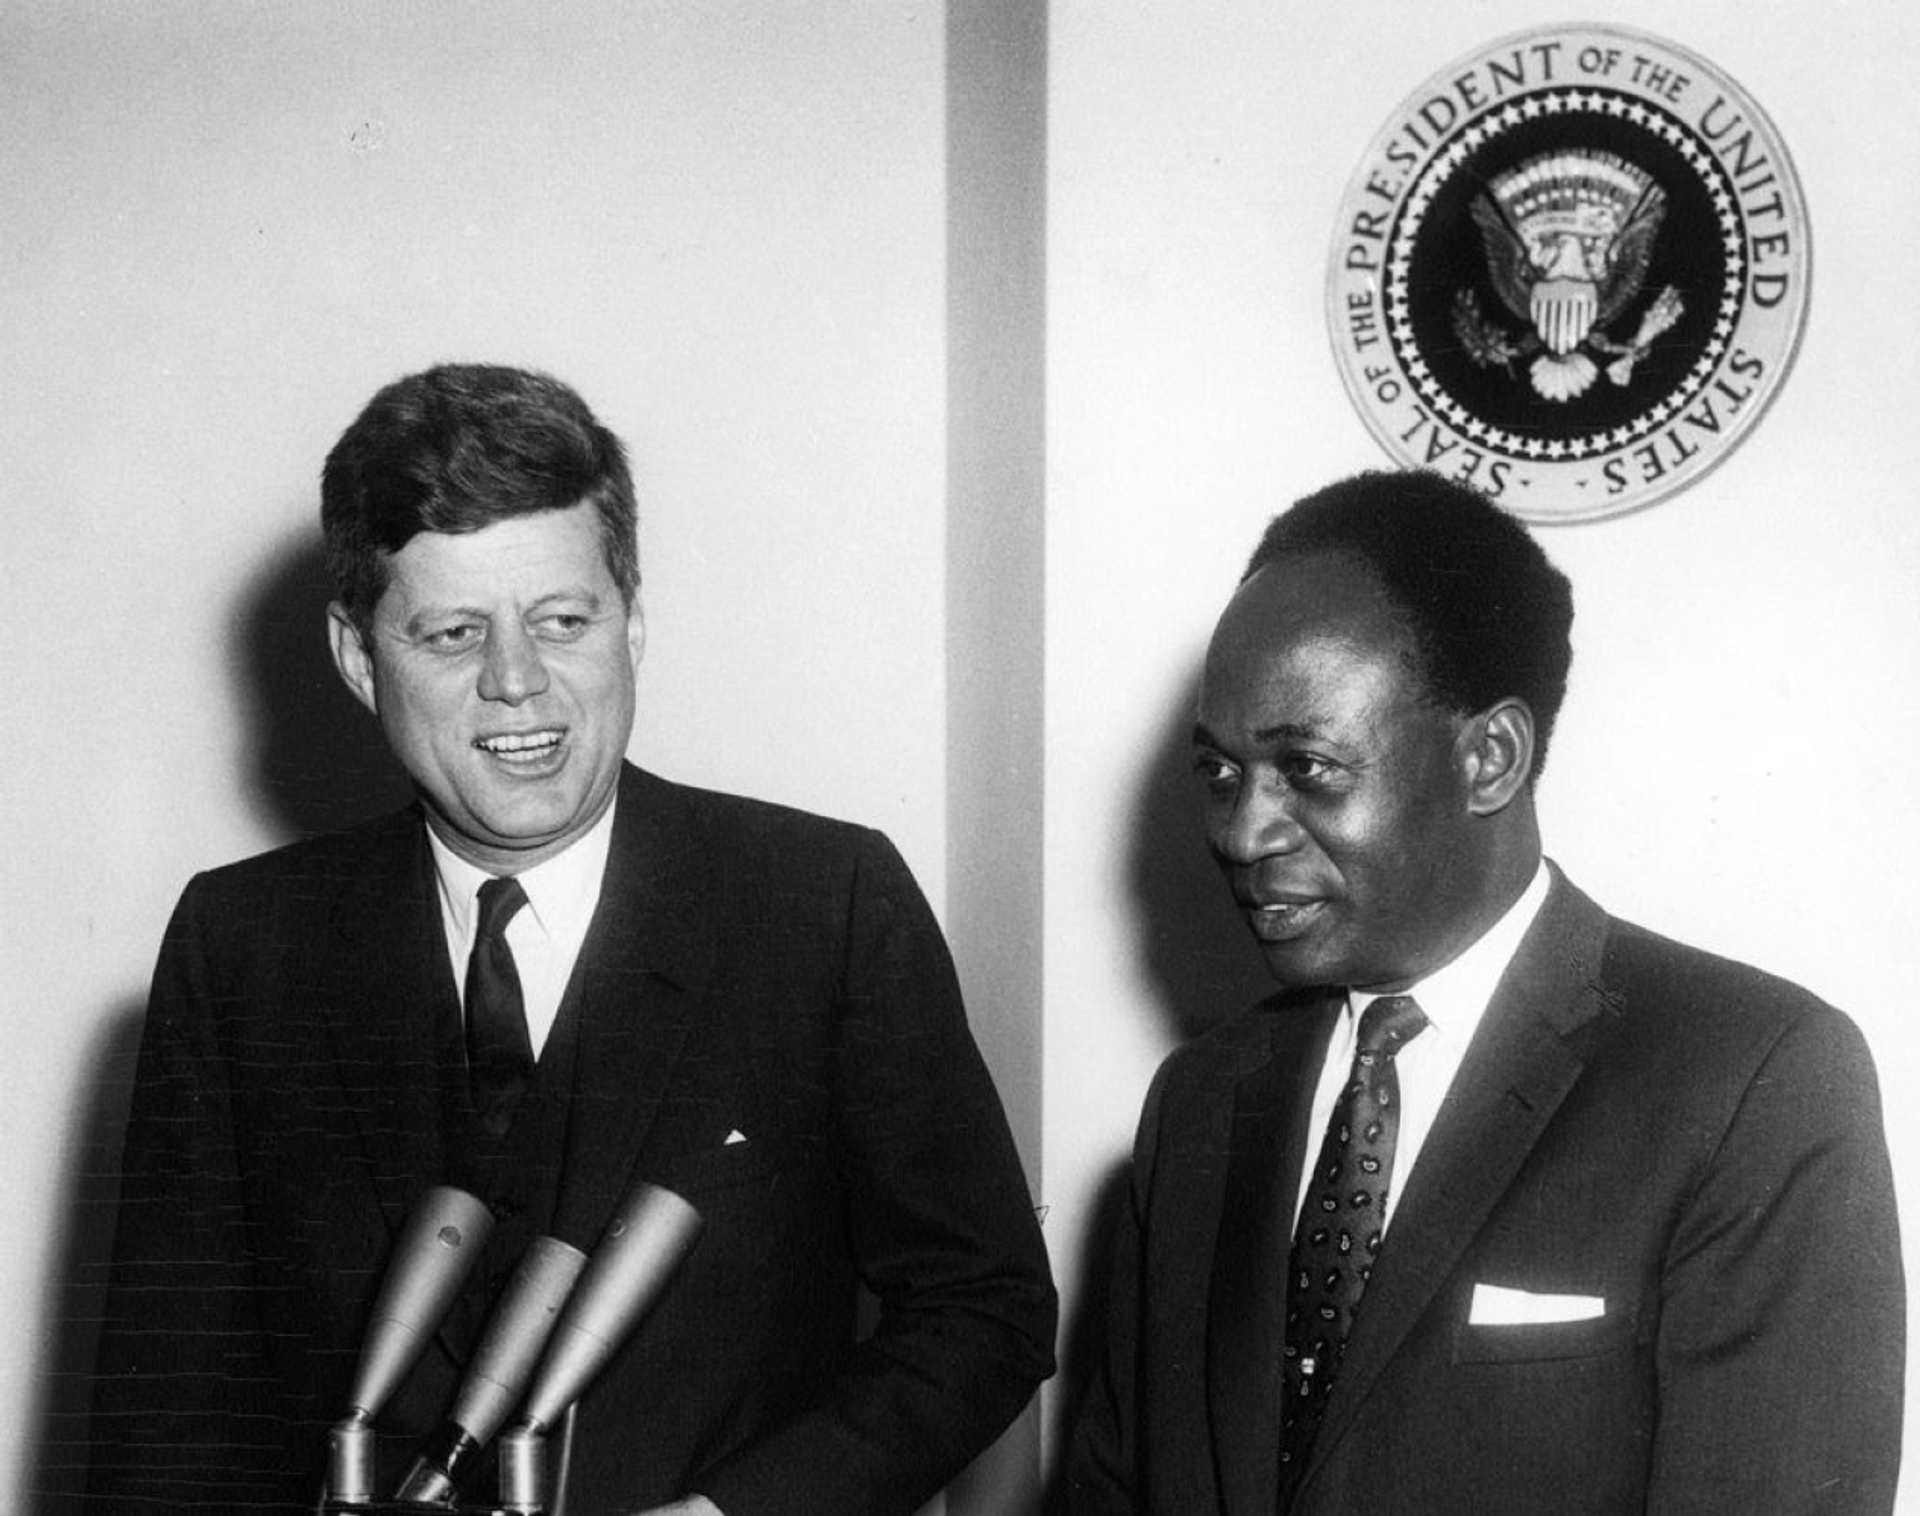 US President John F. Kennedy Meets with the President of the Republic of Ghana, Osagyefo Dr. Kwame Nkrumah, on 8 March 1961. - Sputnik International, 1920, 24.08.2022